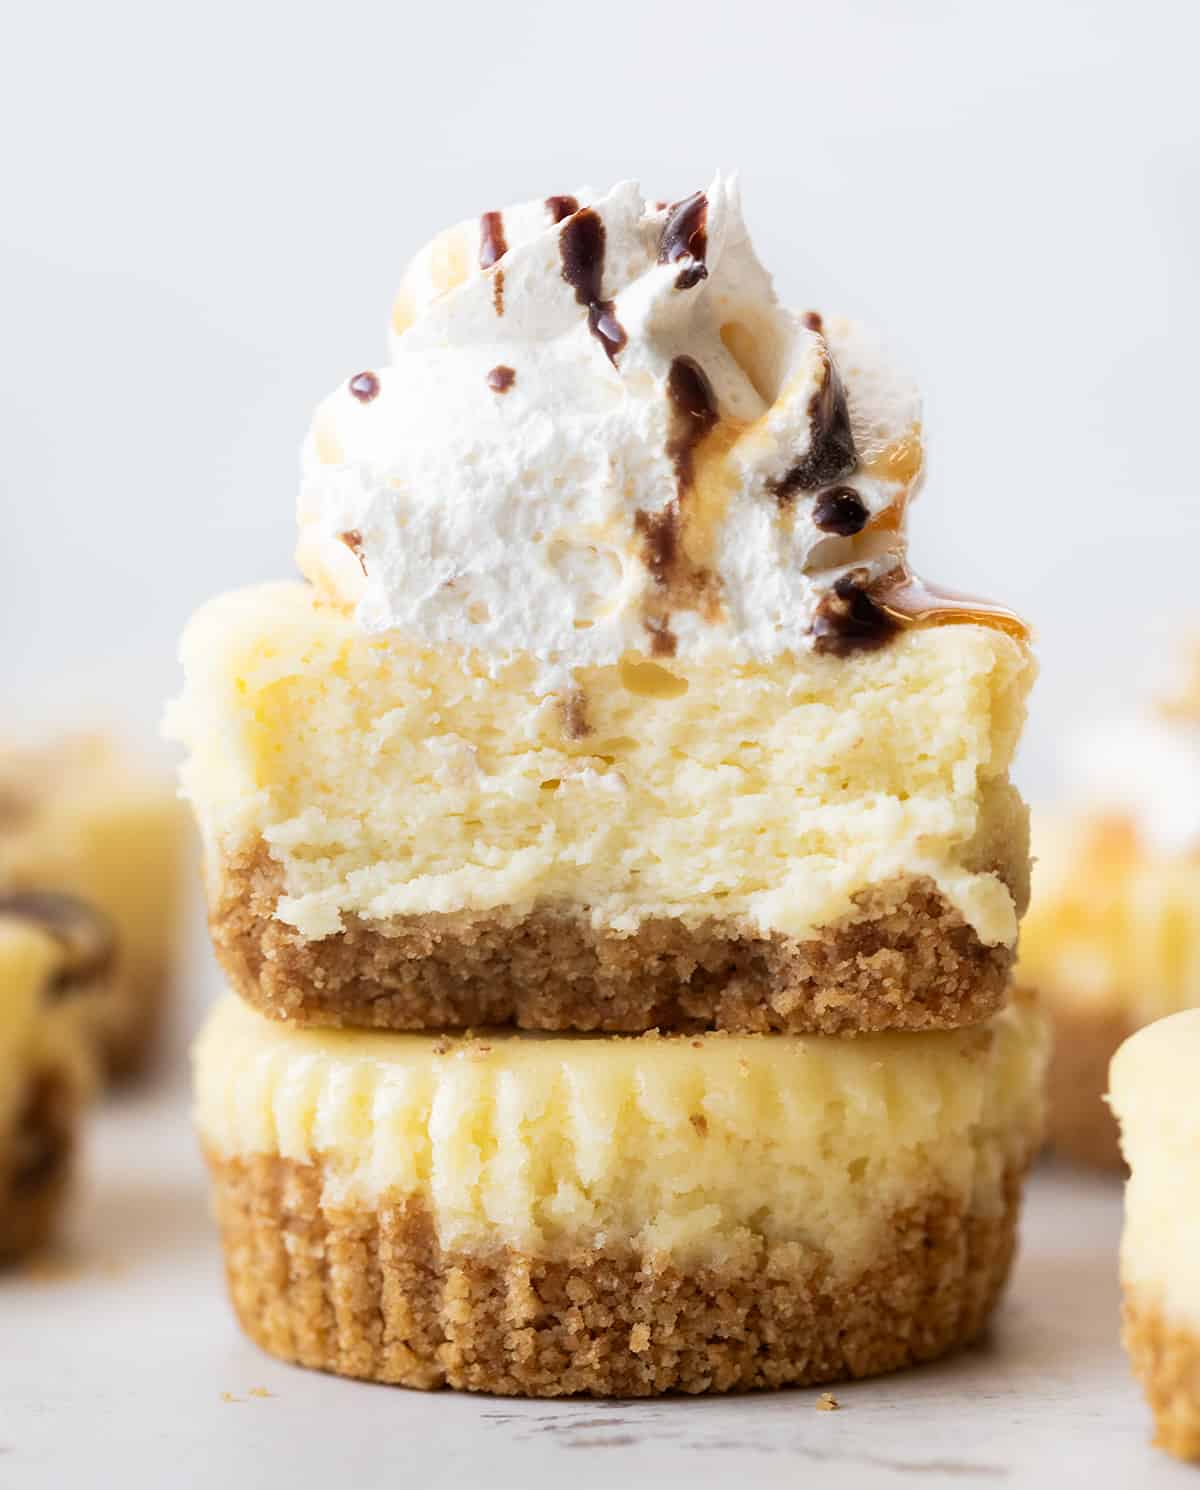 Mini Cheesecakes stacked with top cheesecake cut in half showing tender inside.